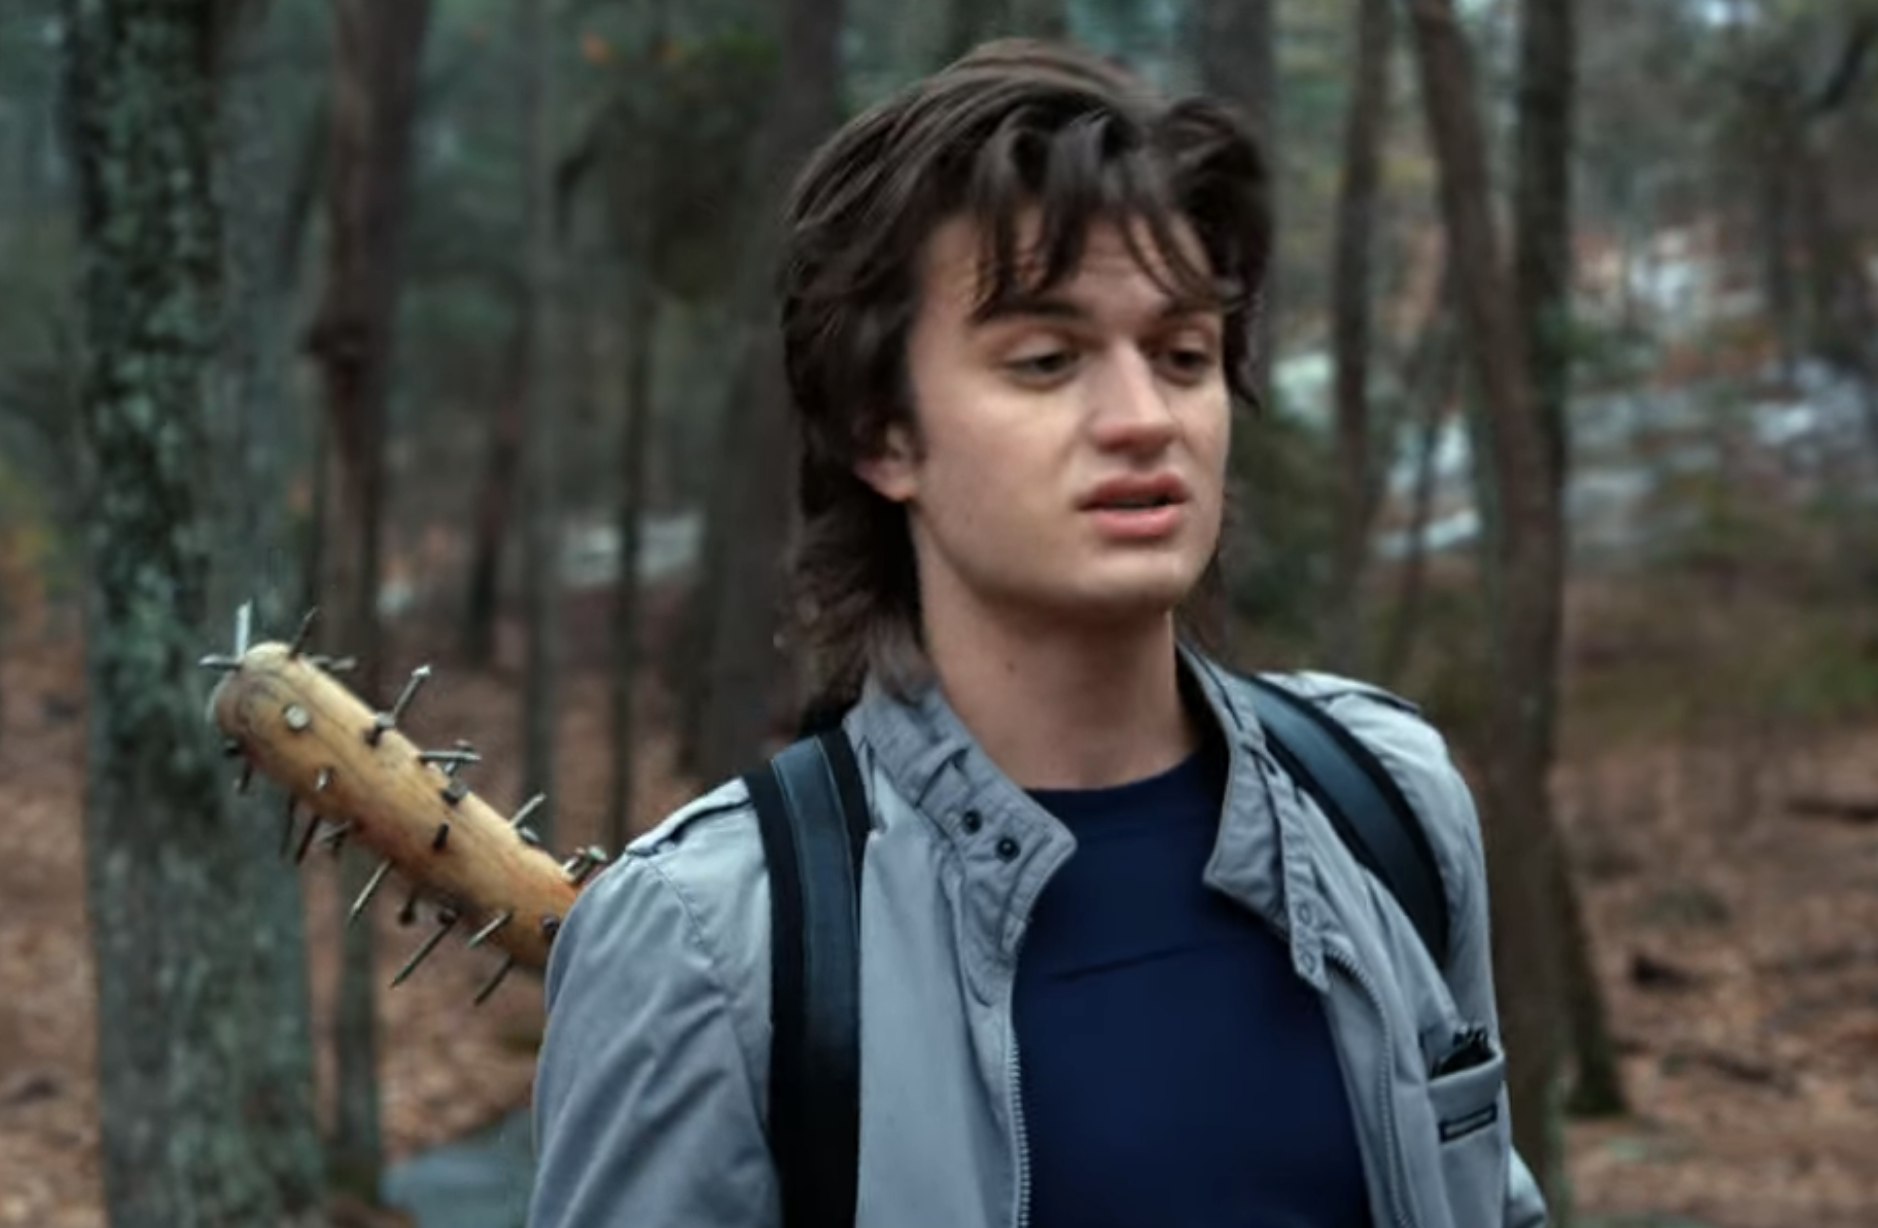 Steve walks in the woods, a baseball bat with nails in hanging out of his backpack